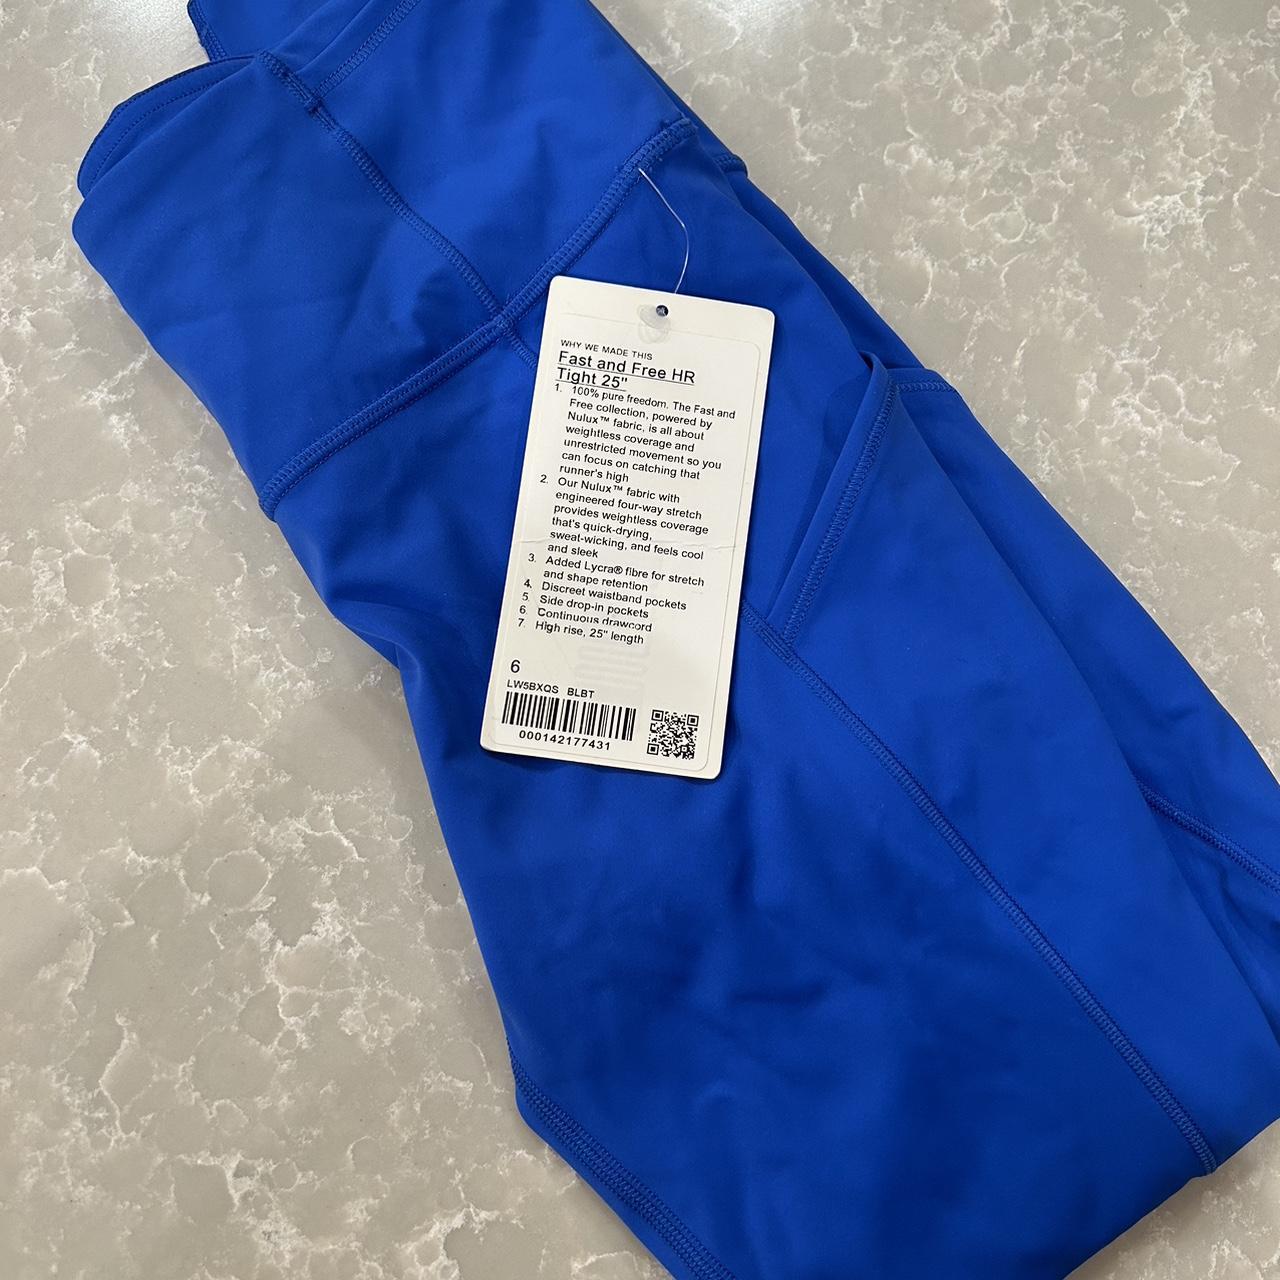 Lululemon Fast and Free Tight 25 *Nulux size 6 in